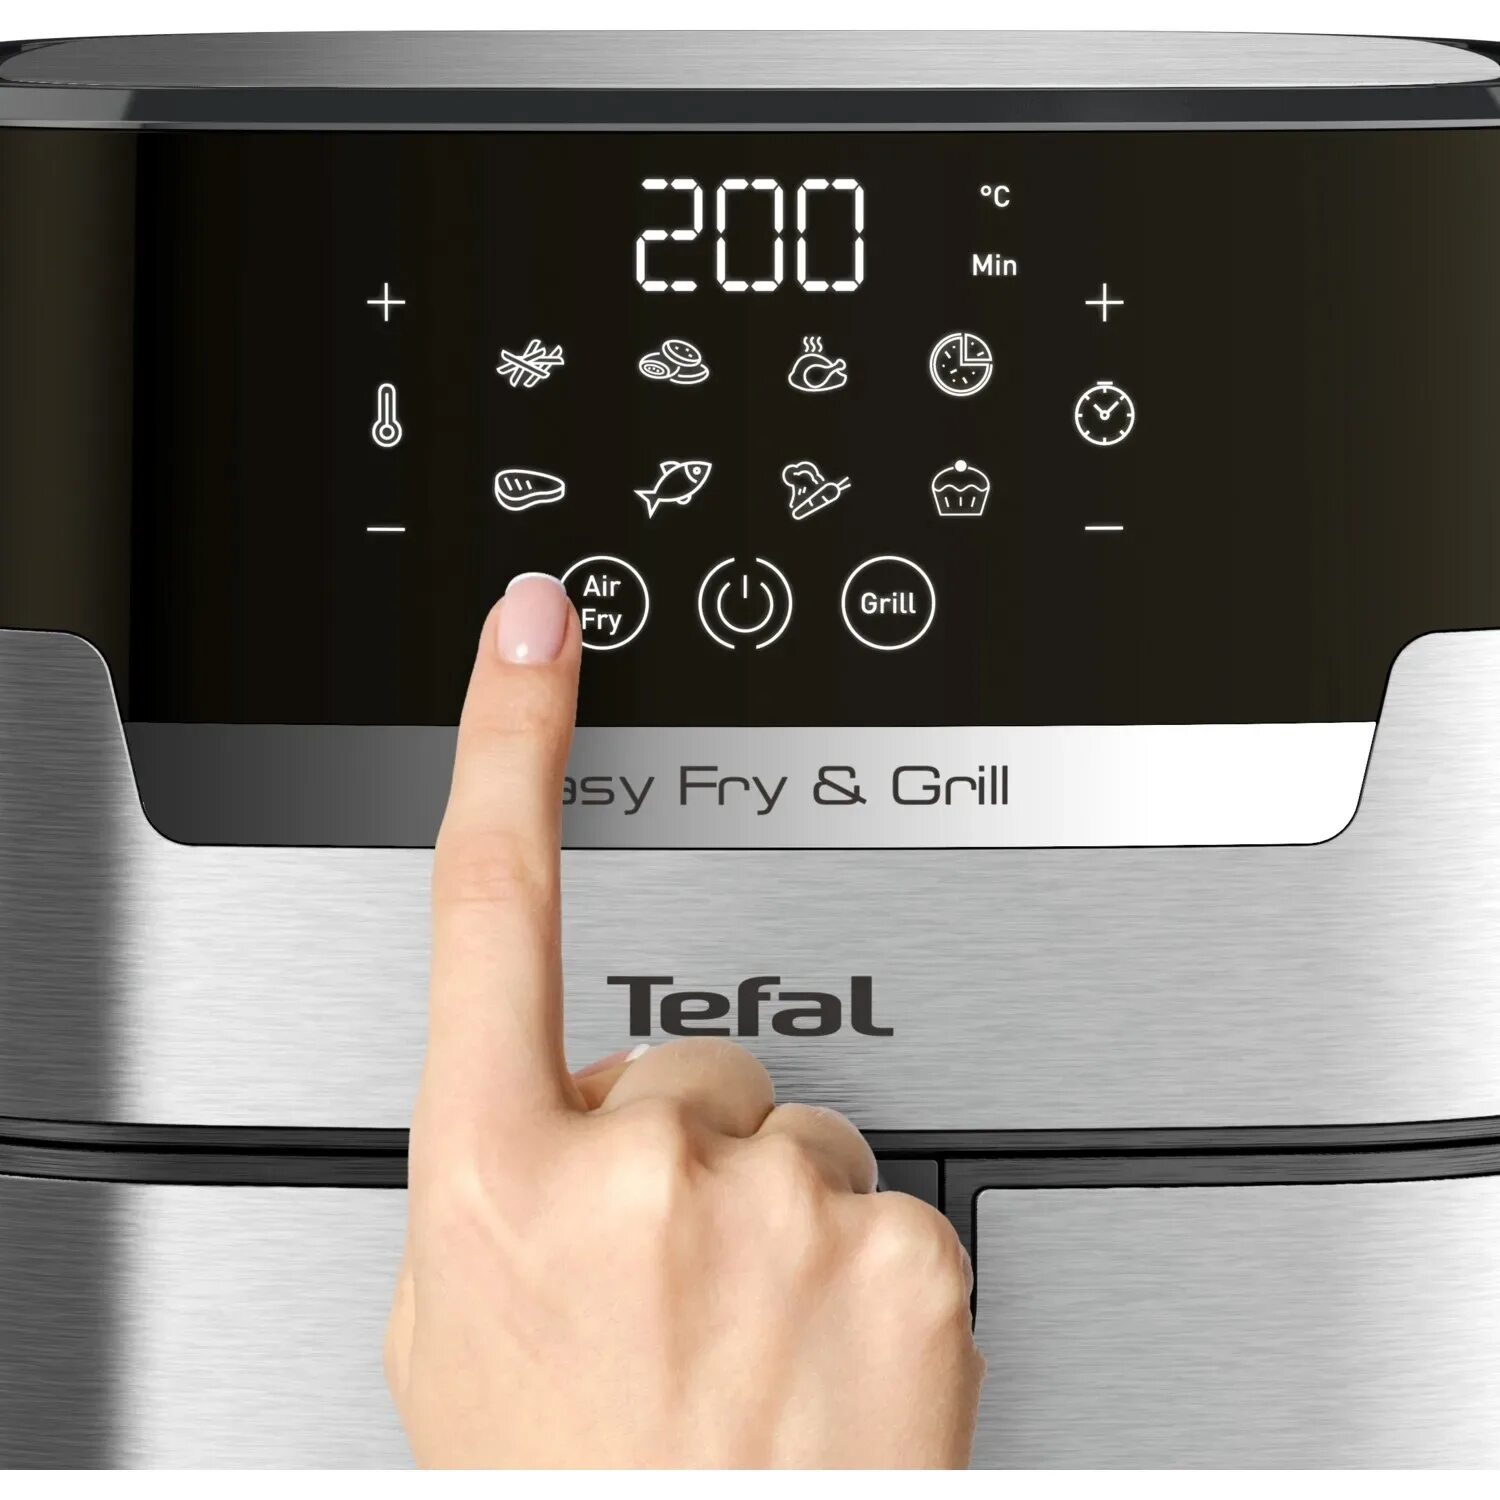 Easy fry grill. Tefal ey505d15. Easy Fry Tefal Grill. Tefal easy Fry & Grill Precision. Ey505d15 аэрогриль.